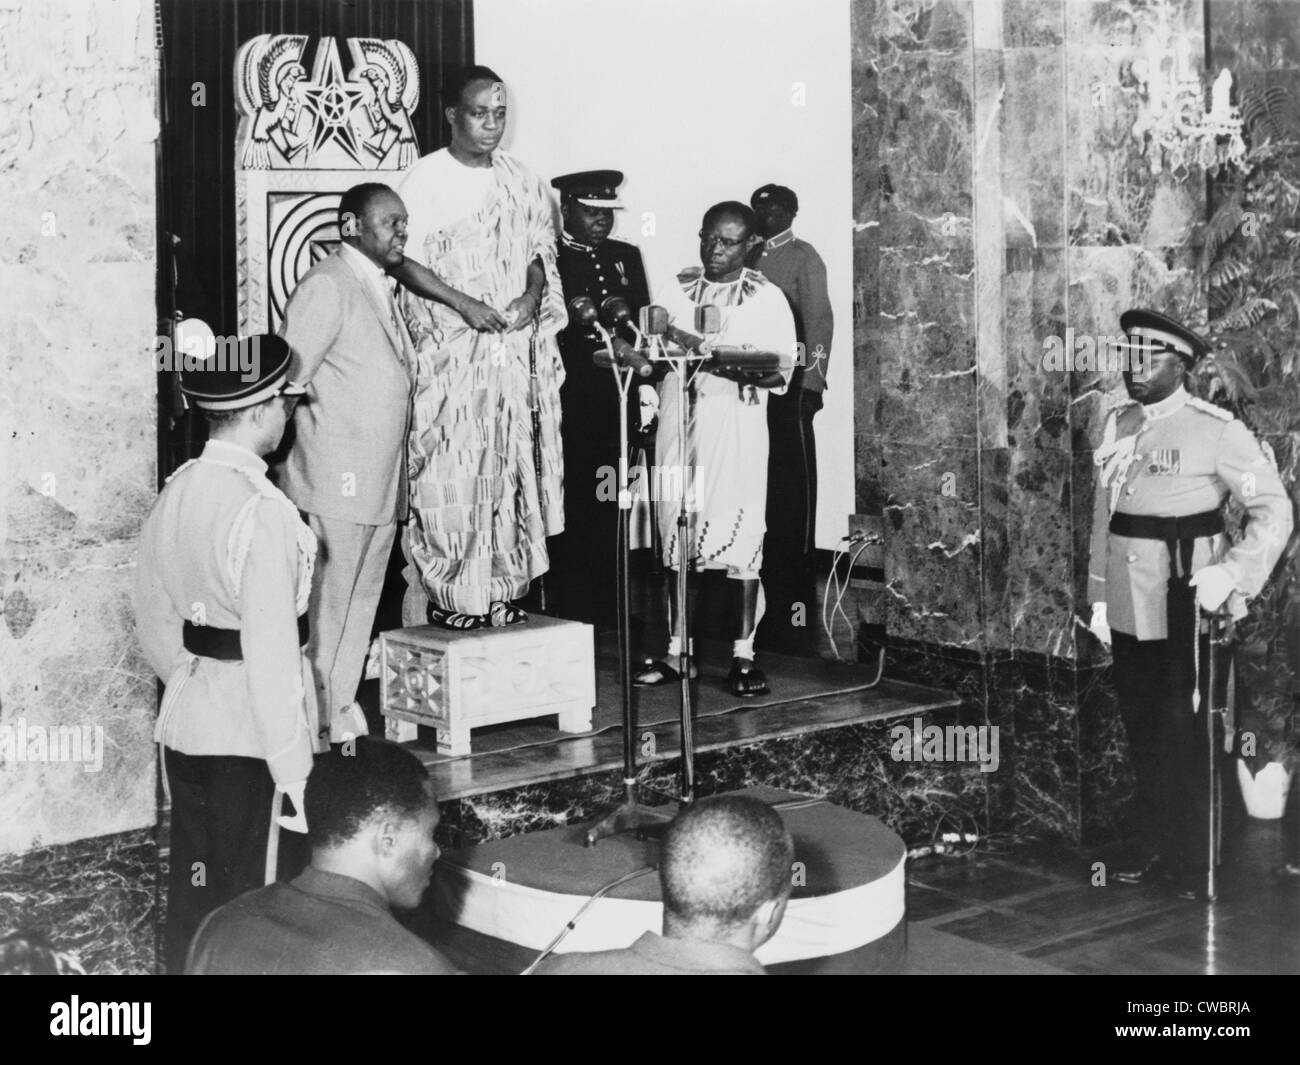 First President Of Ghana Banque d'image et photos - Alamy